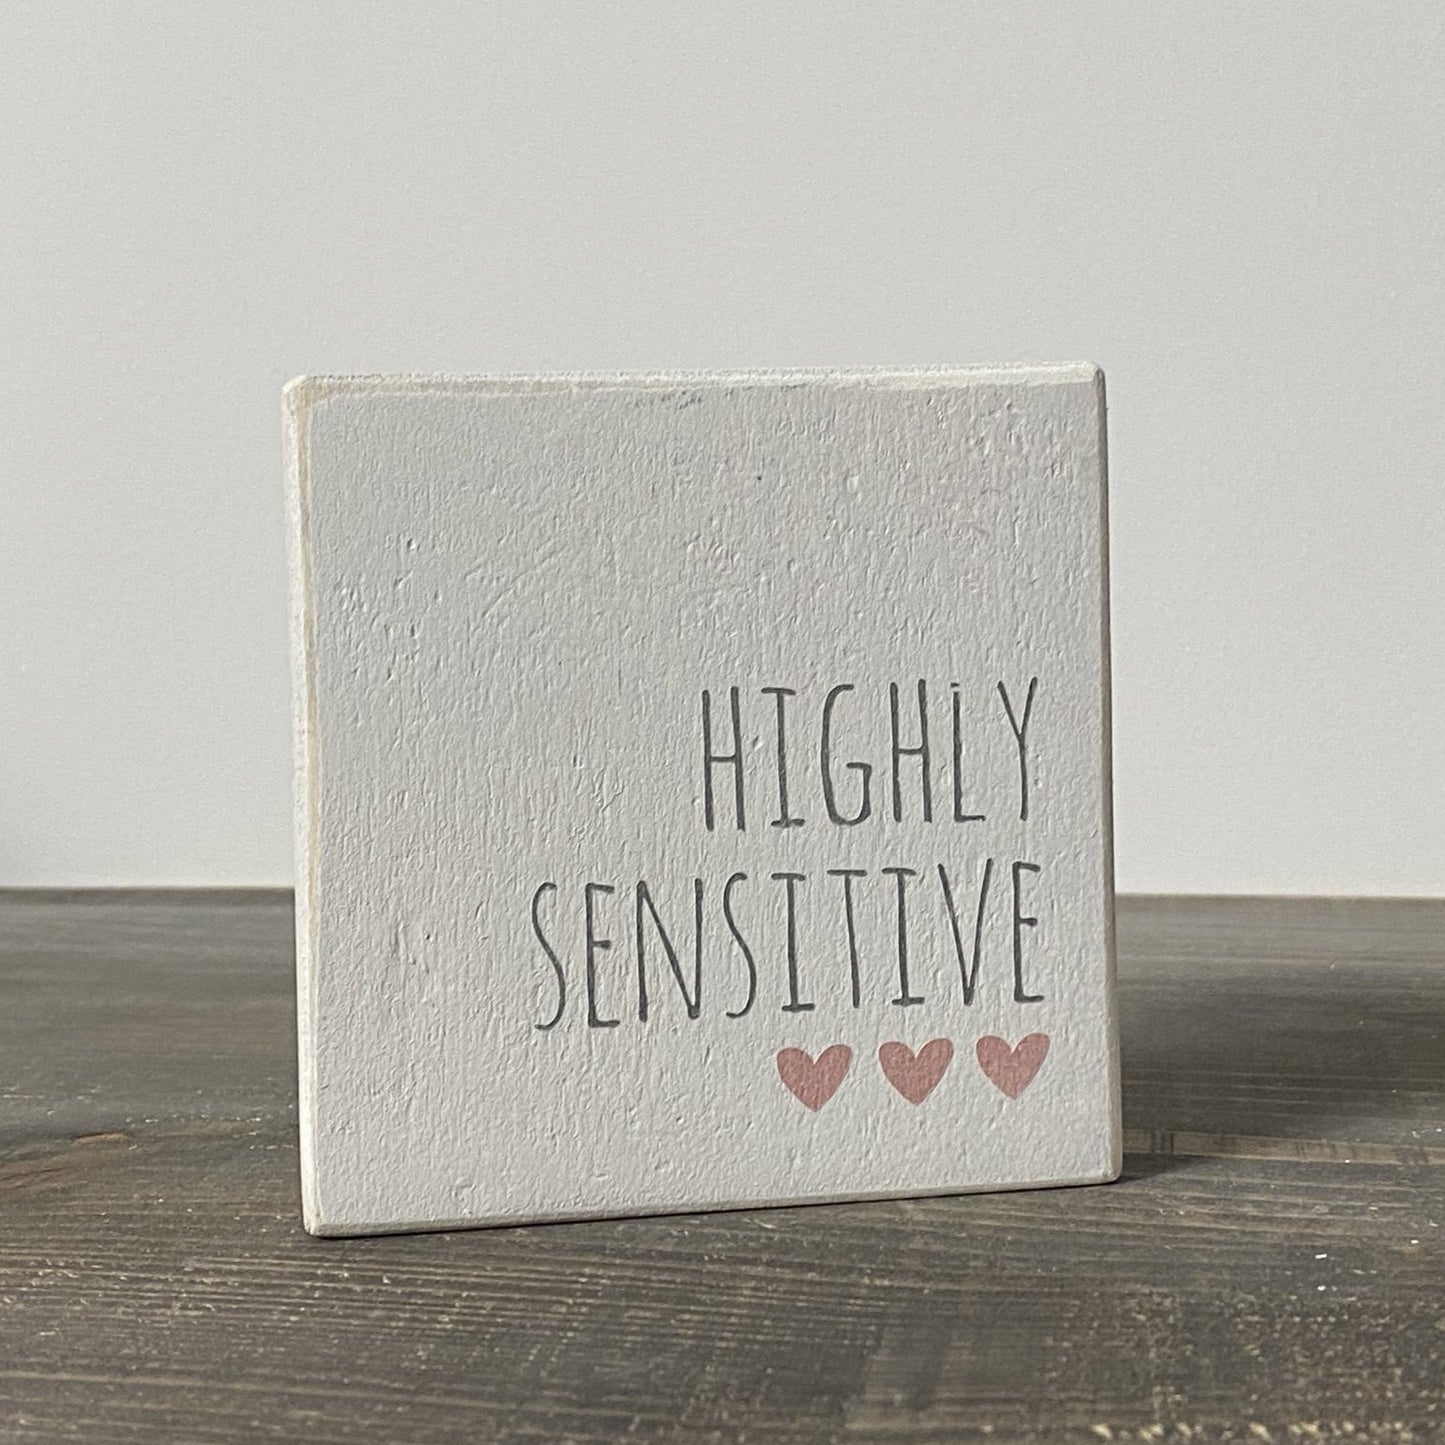 Reclaimed Wood Mini Sign | Highly Sensitive - The Imperfect Wood Company - Mini wood sign